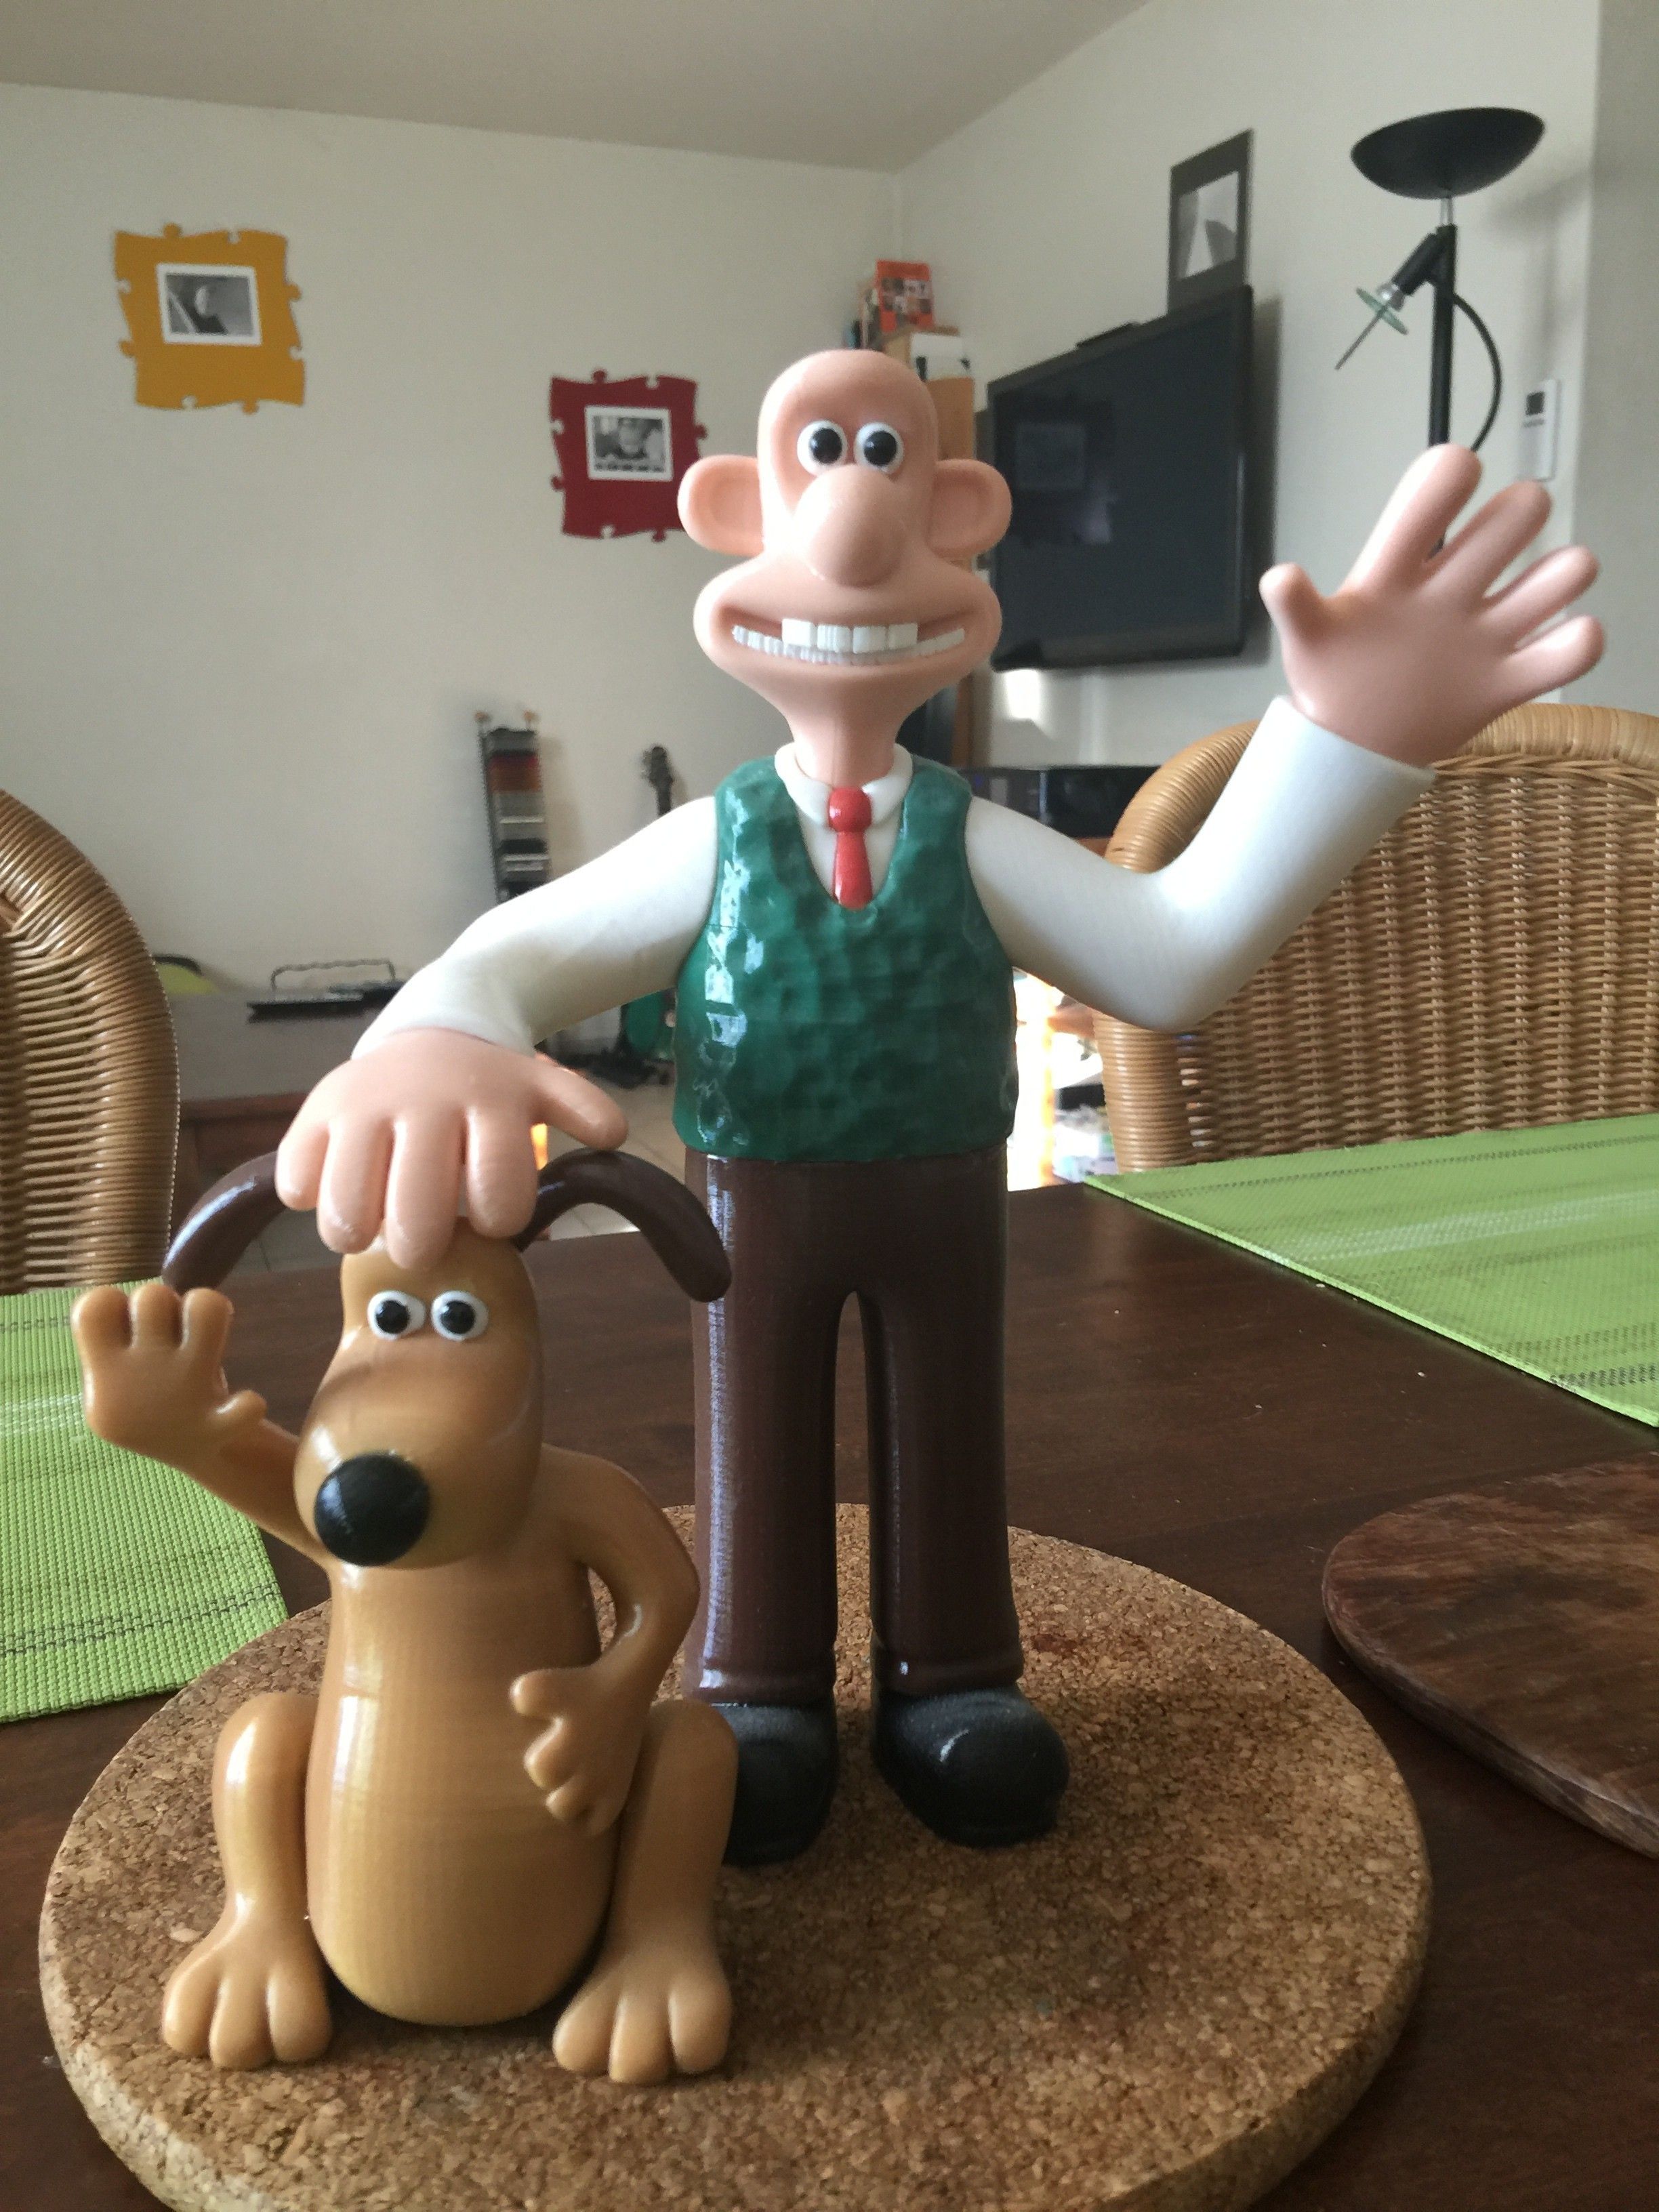 Wallace and Gromit, GabuZome